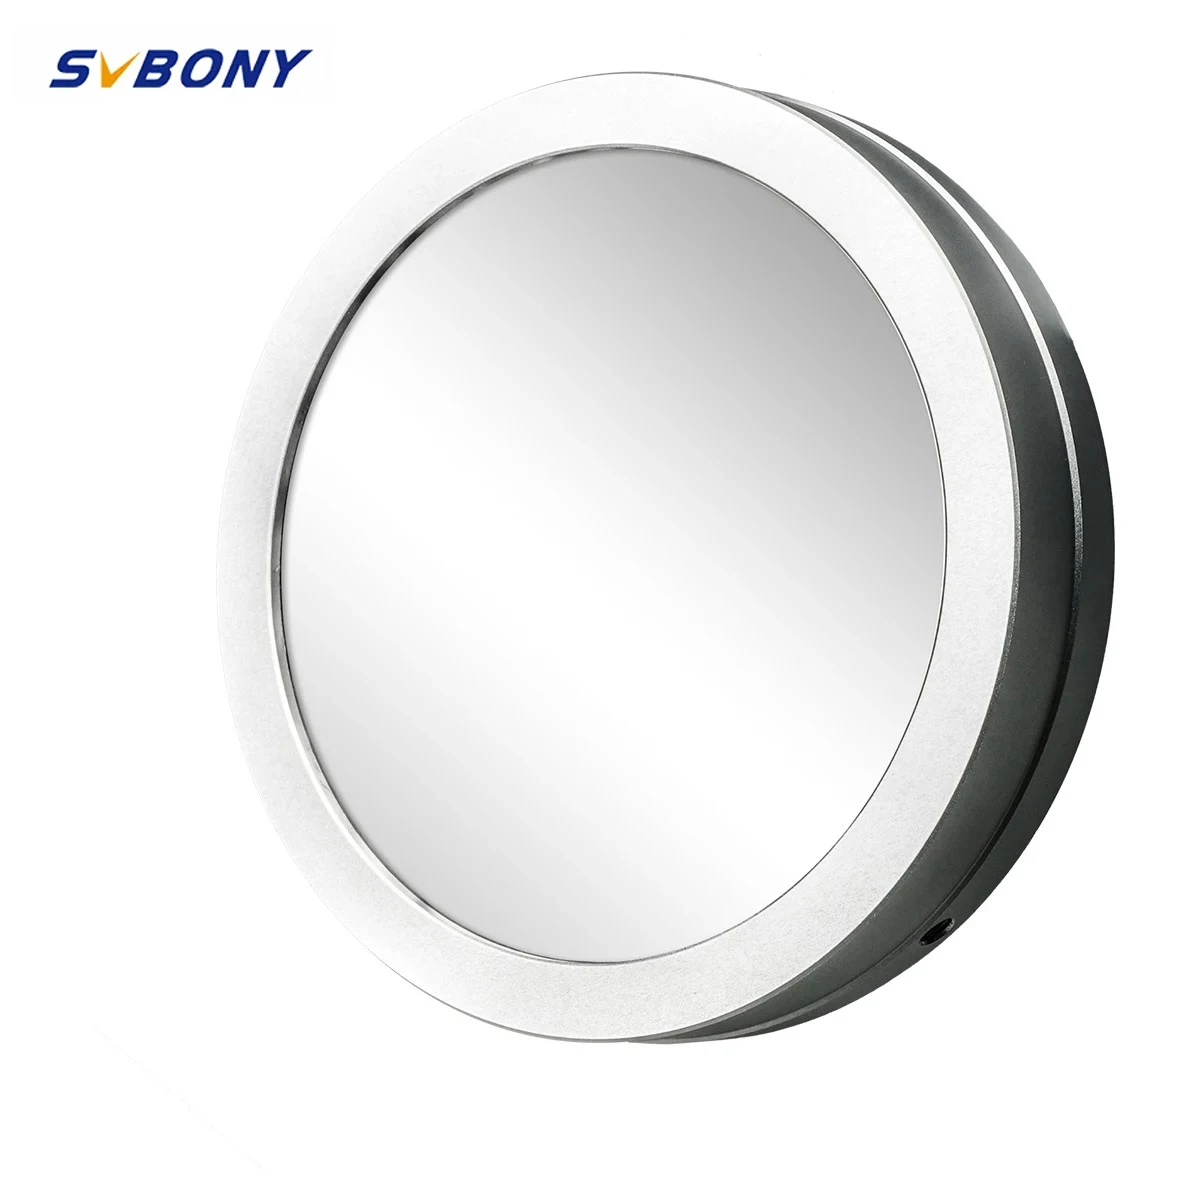 SVBONY SV229 Solar Filter Metal Cap Aperture 140mm for Tubes with Outer Diameter from 118mm to 159mm of Telescope